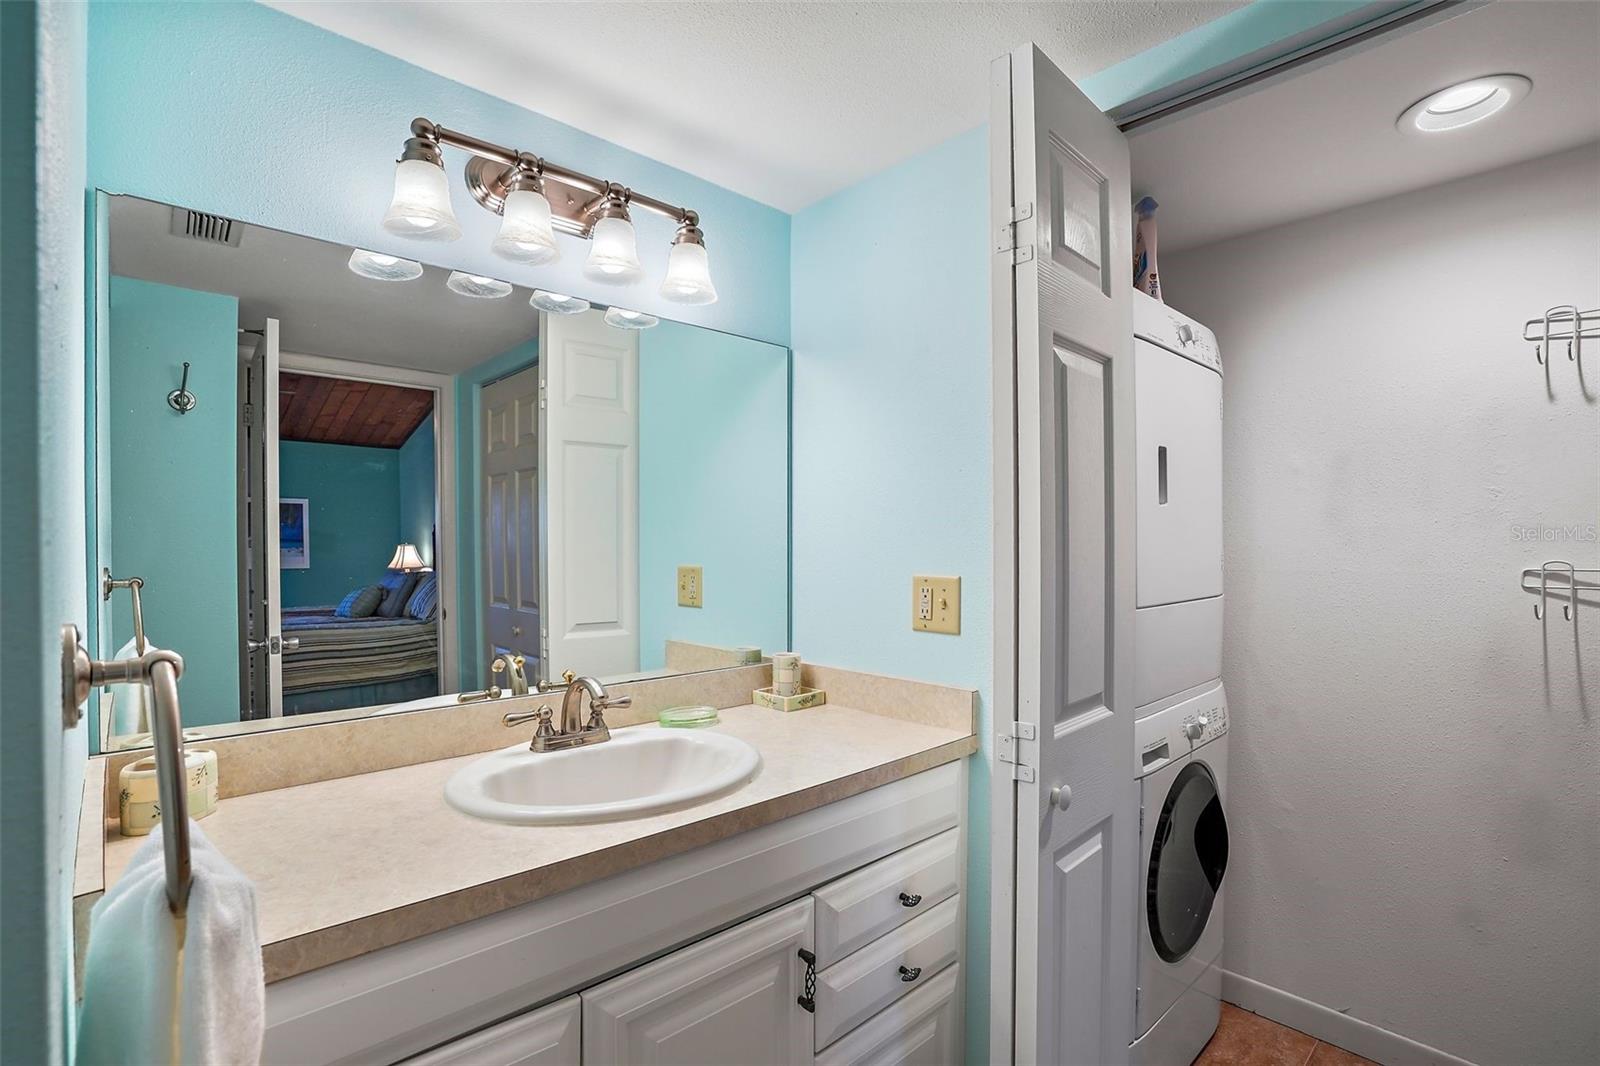 Laundry and extra storage in bathroom closet